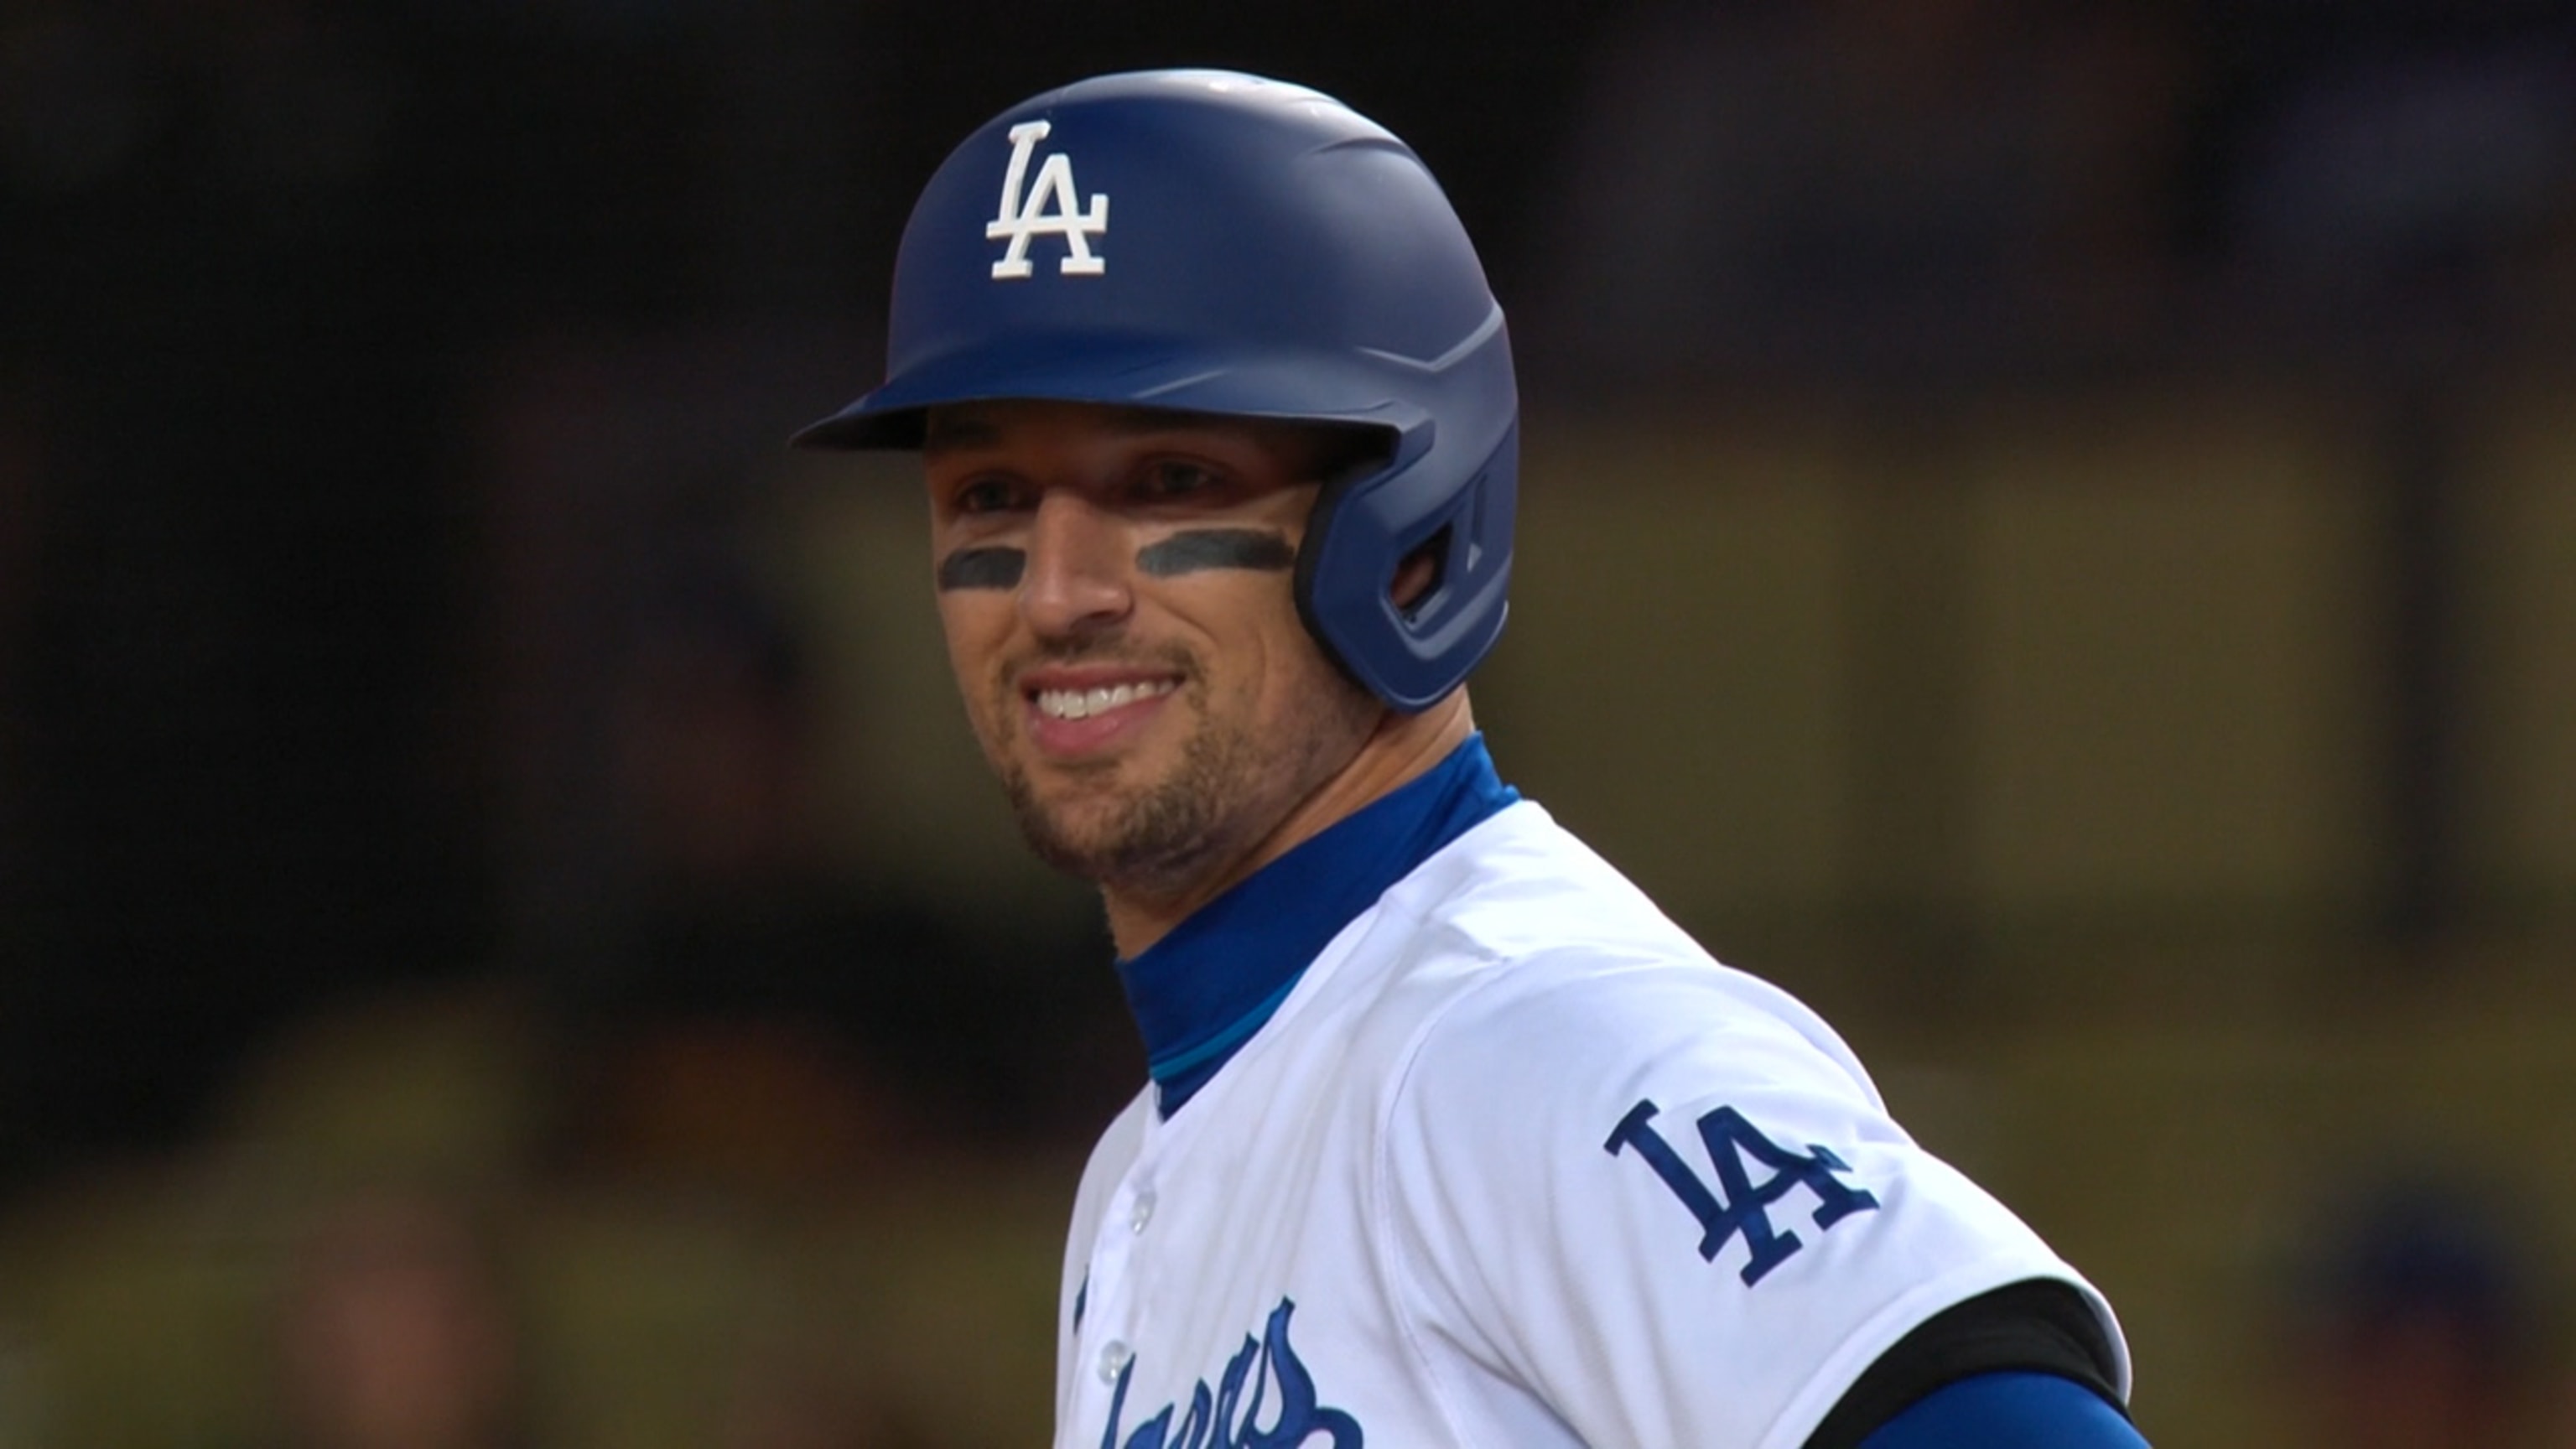 FOX Sports: MLB on X: Chris Taylor is the first player in MLB